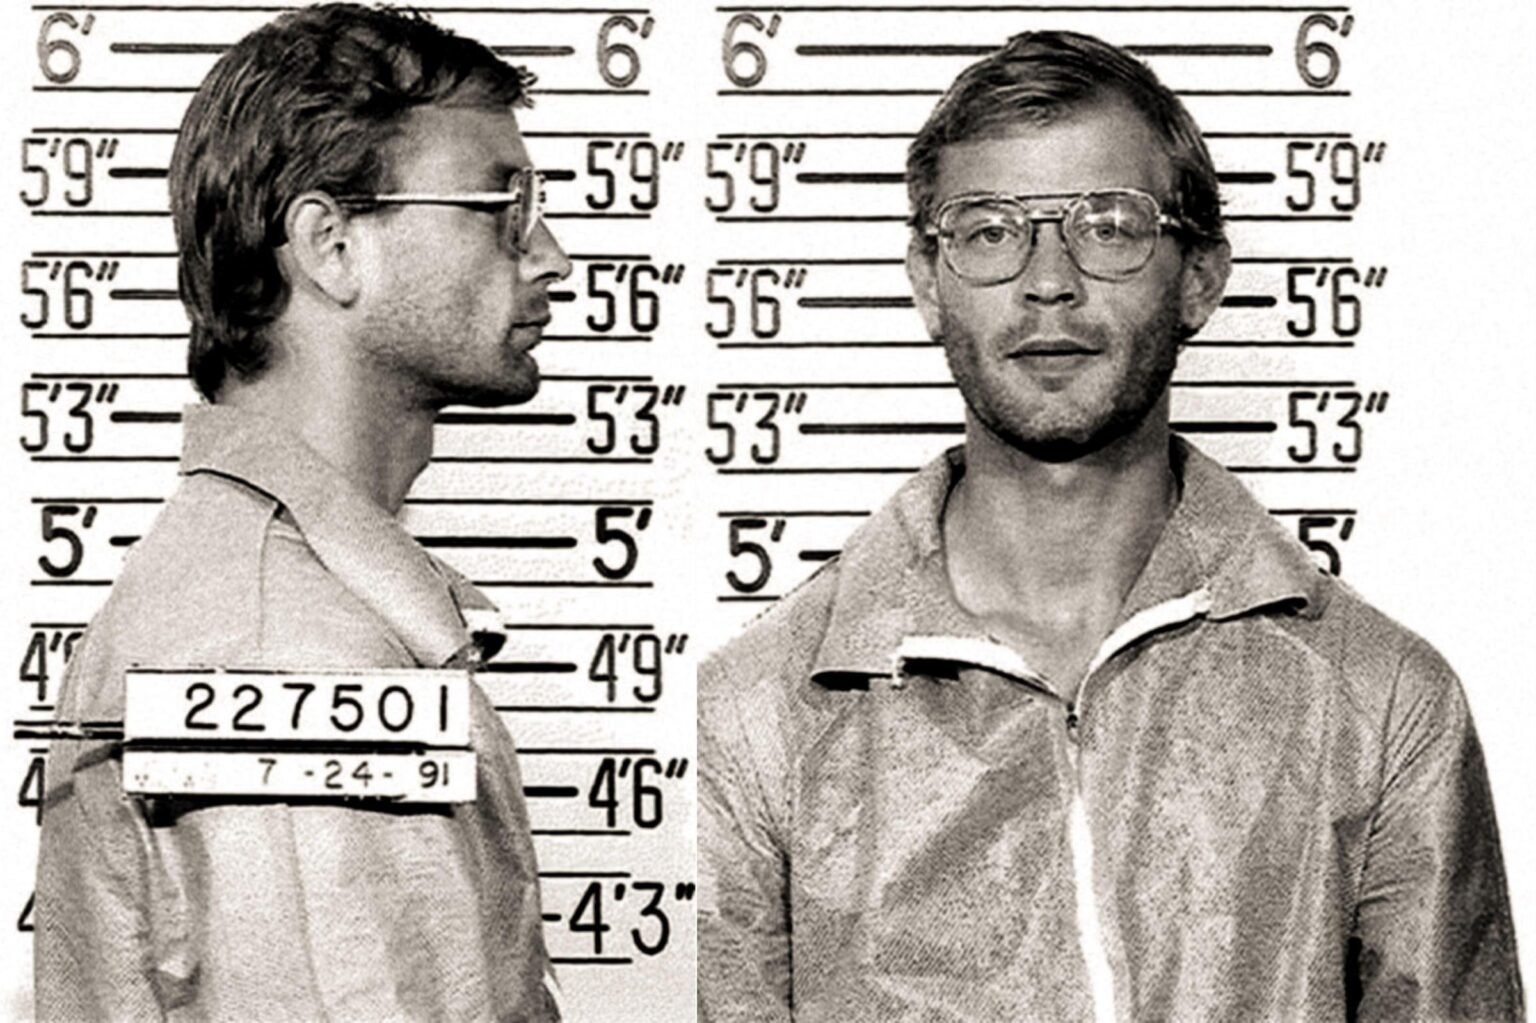 Jeffrey Dahmer was one of the most notorious serial killers in U.S. history. At the height of his spree, how many people did he kill?